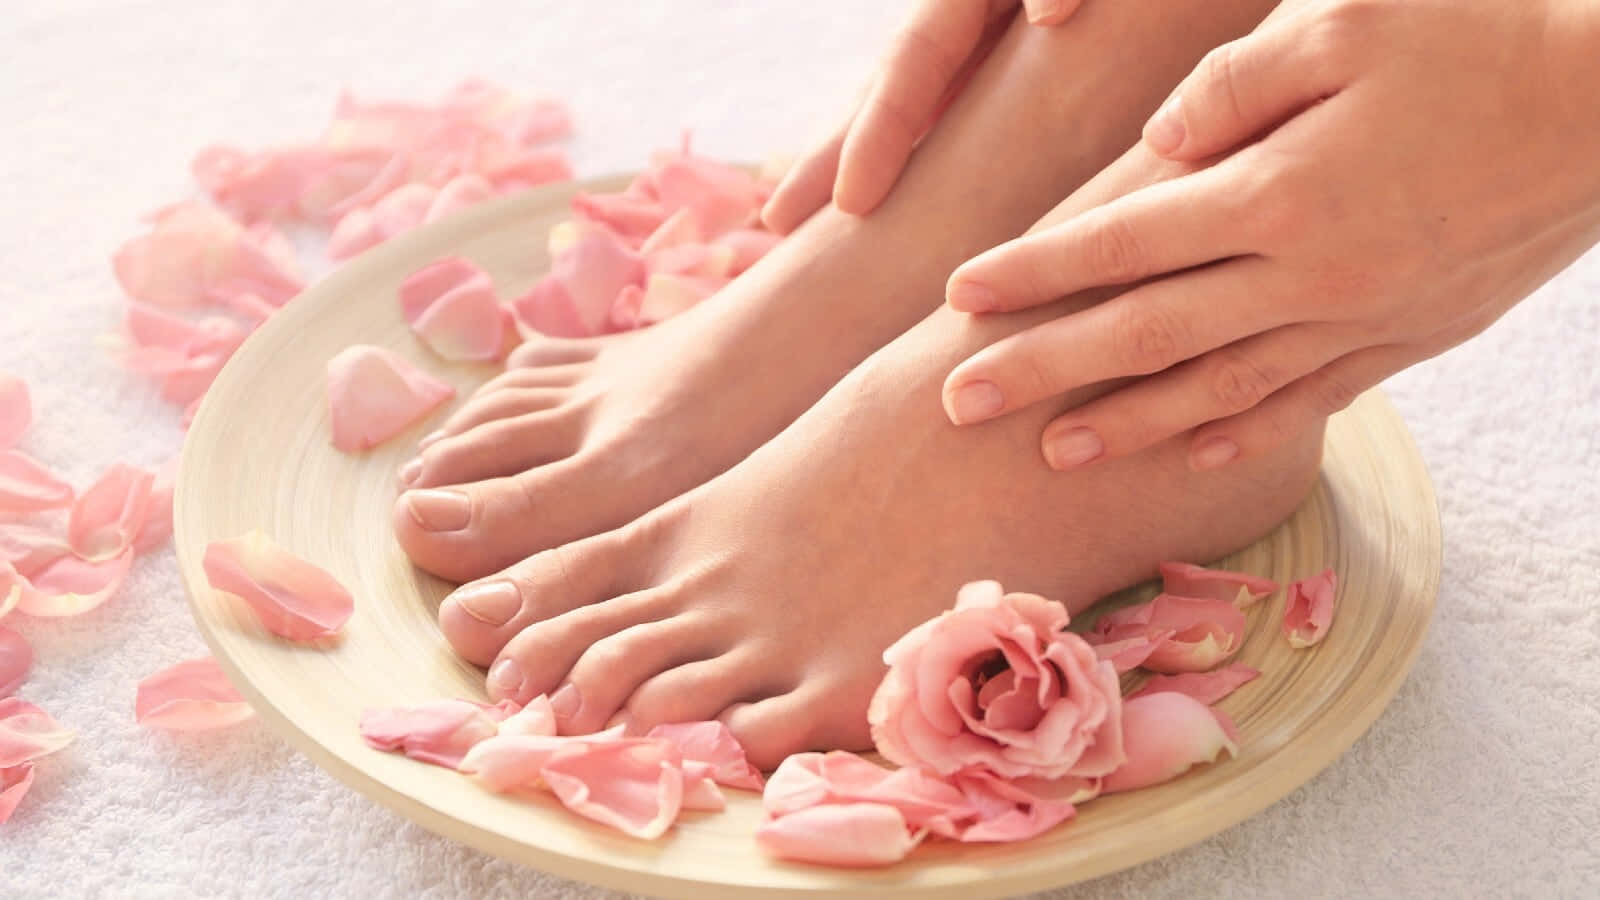 Woman's Feet Soaked In Rose Petals Pedicure Picture